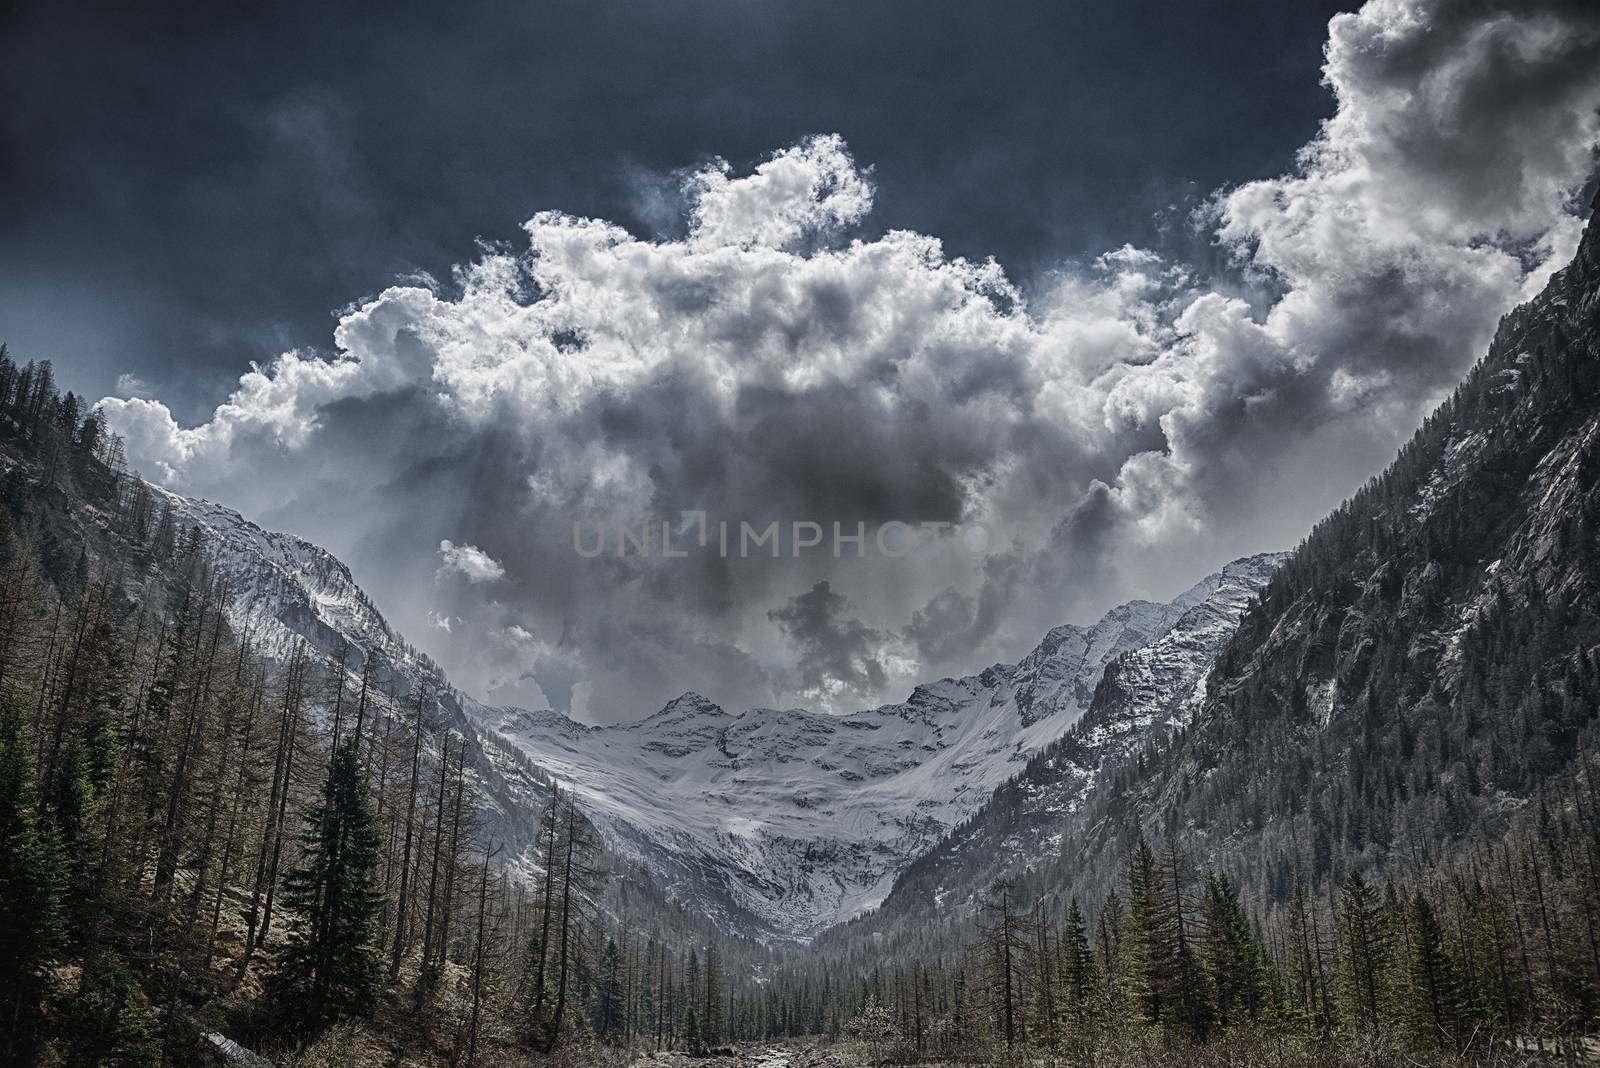 Valley, glacier and storm clouds in background by Mdc1970